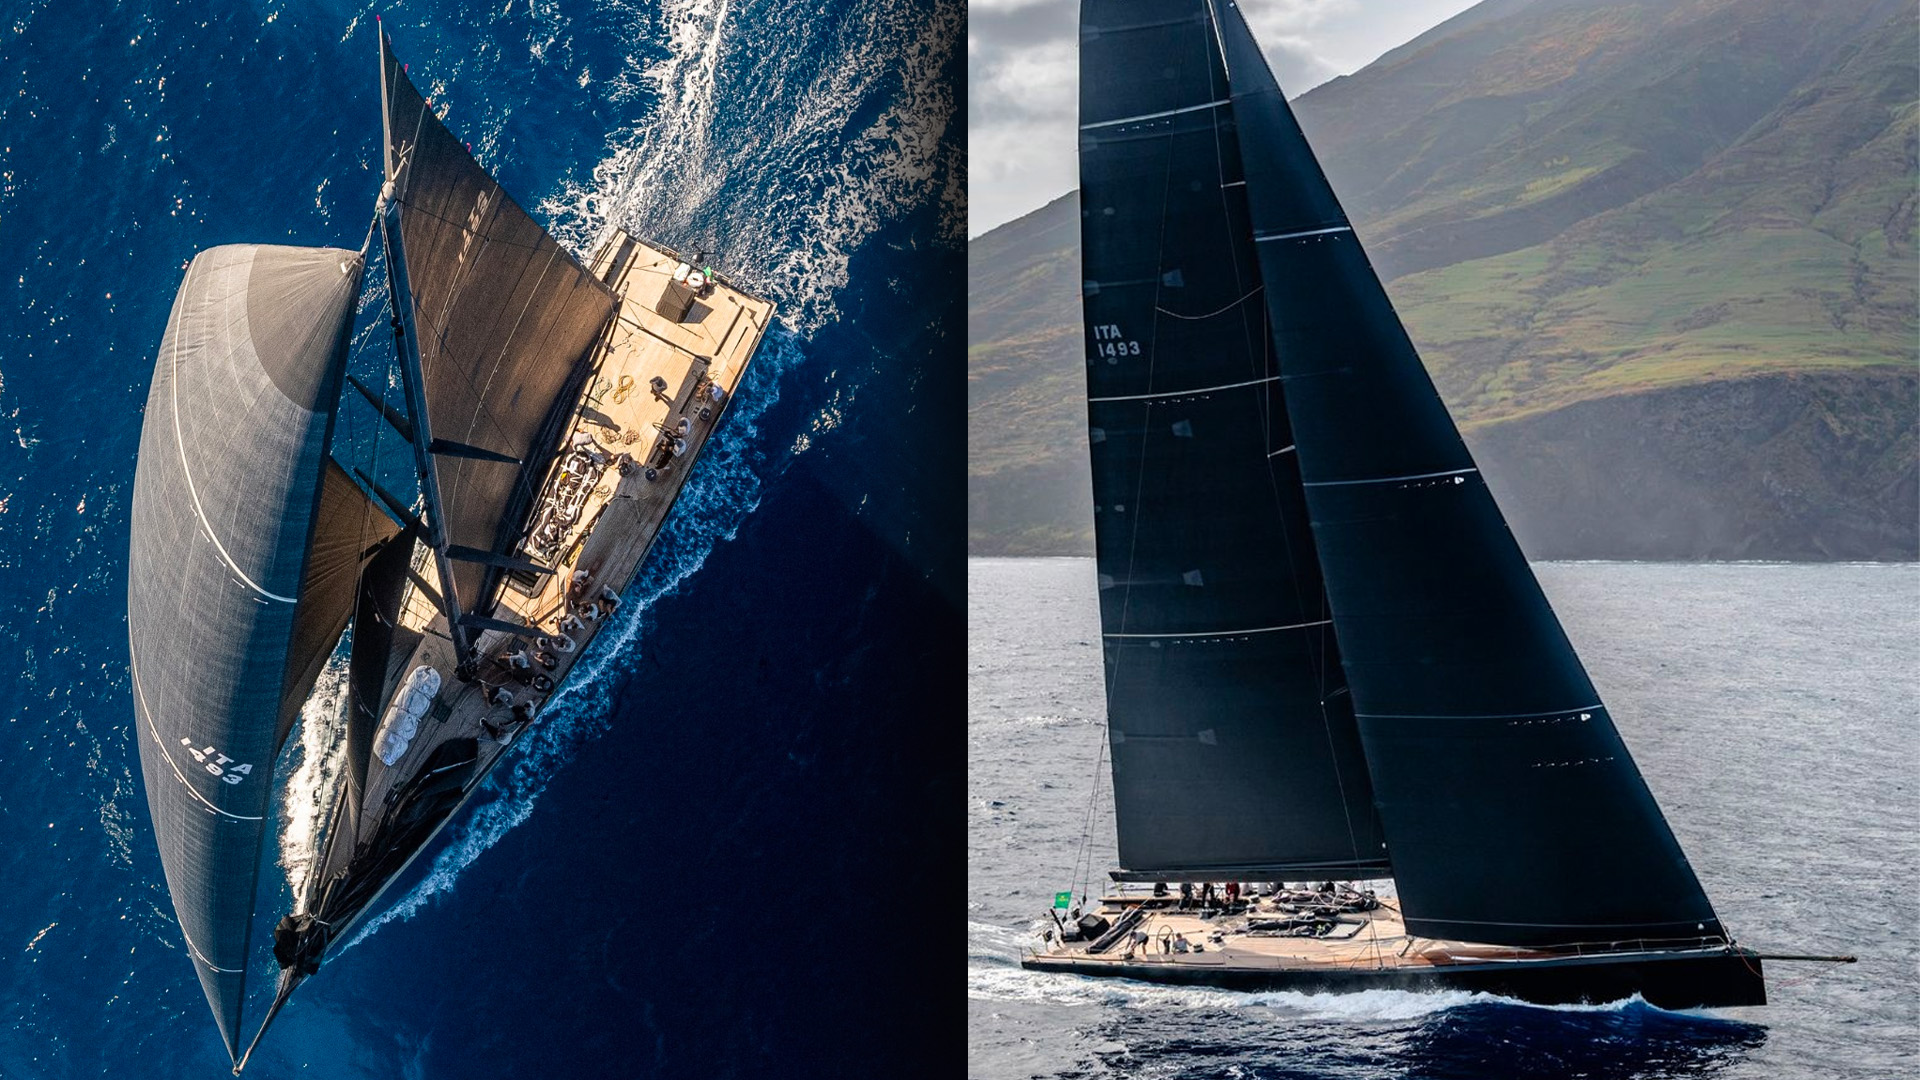 Wally 93 Bullitt Wins the 44th Edition of the Rolex Middle Sea Race